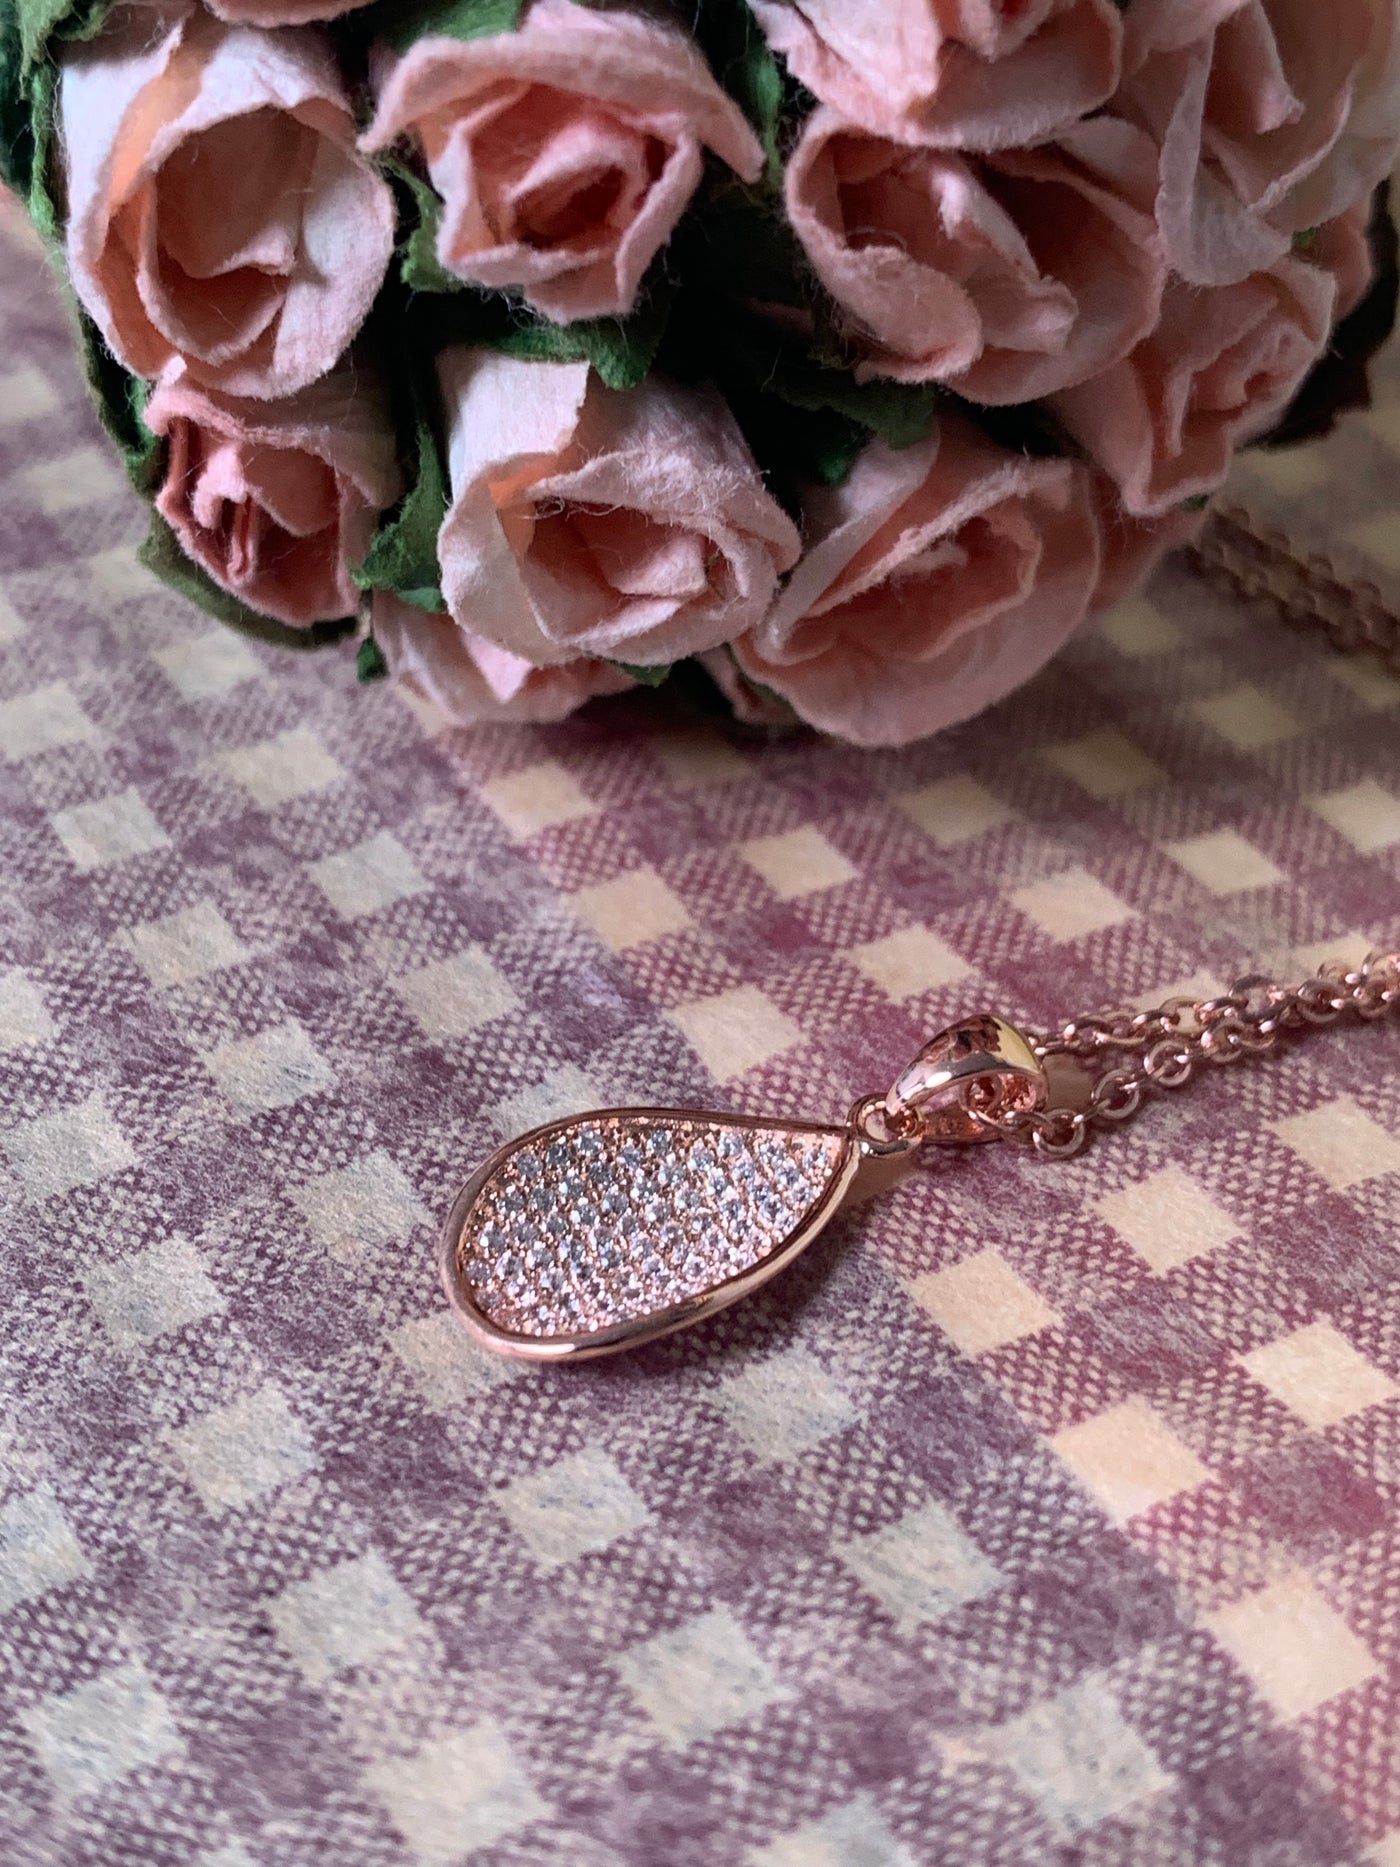 Curvy Tear Shape Pave Set CZ Pendant in Silver, Yellow & Rose Gold Tone